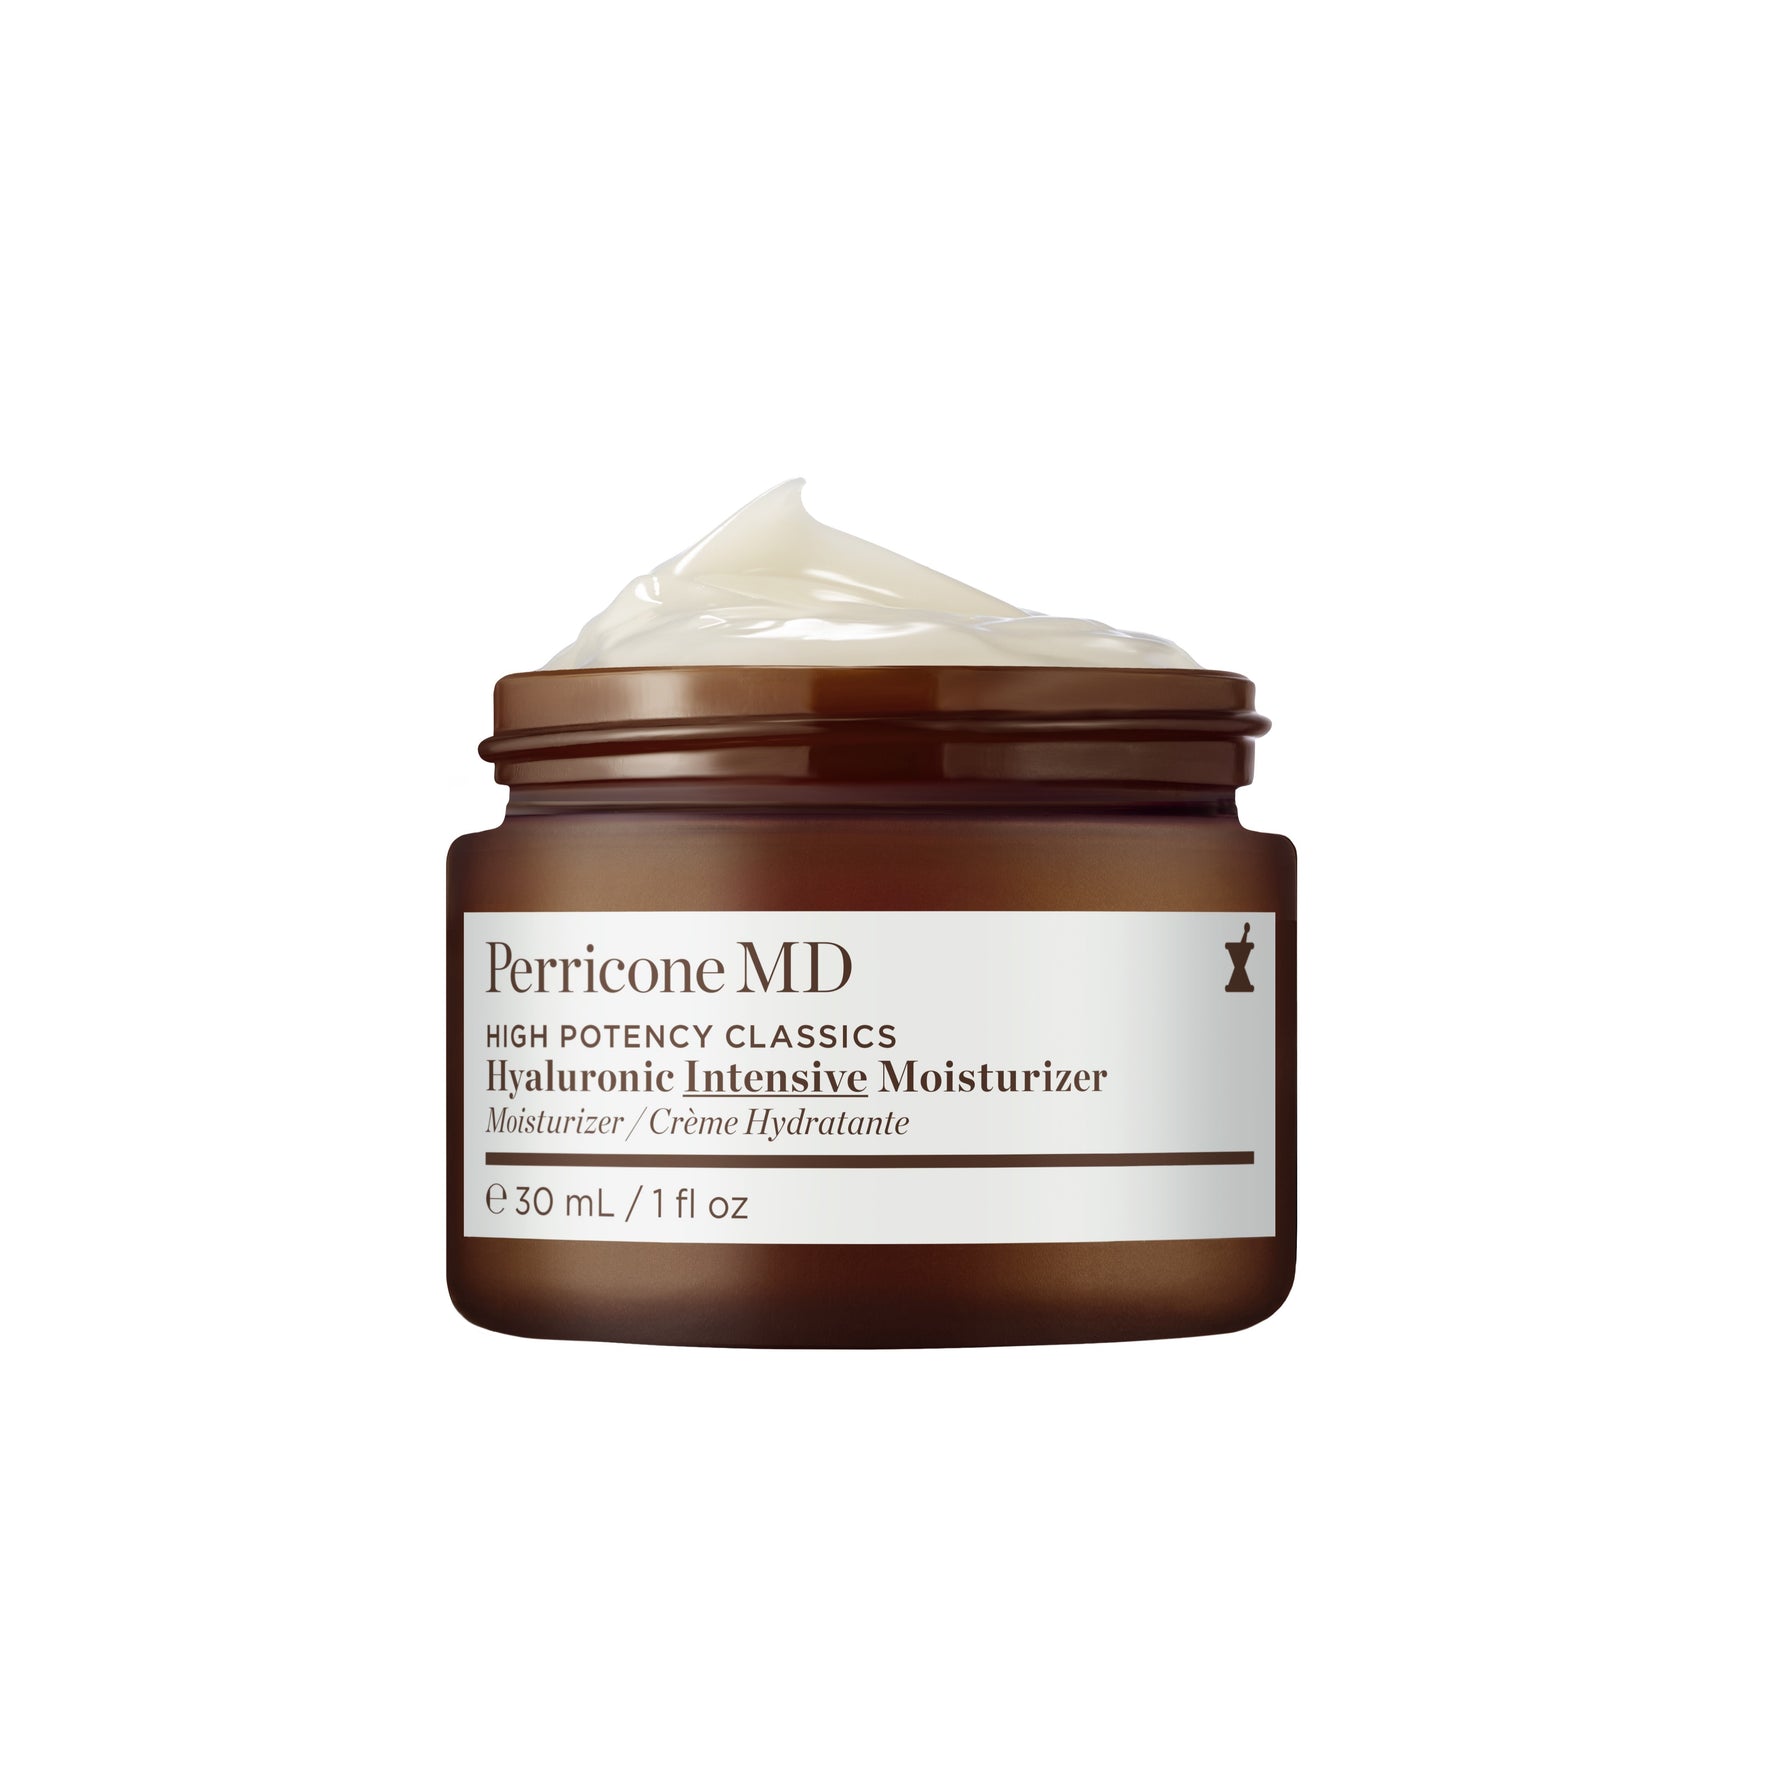 Perricone MD High Potency Classics Hyaluronic Intensive Moisturizer (30ml)